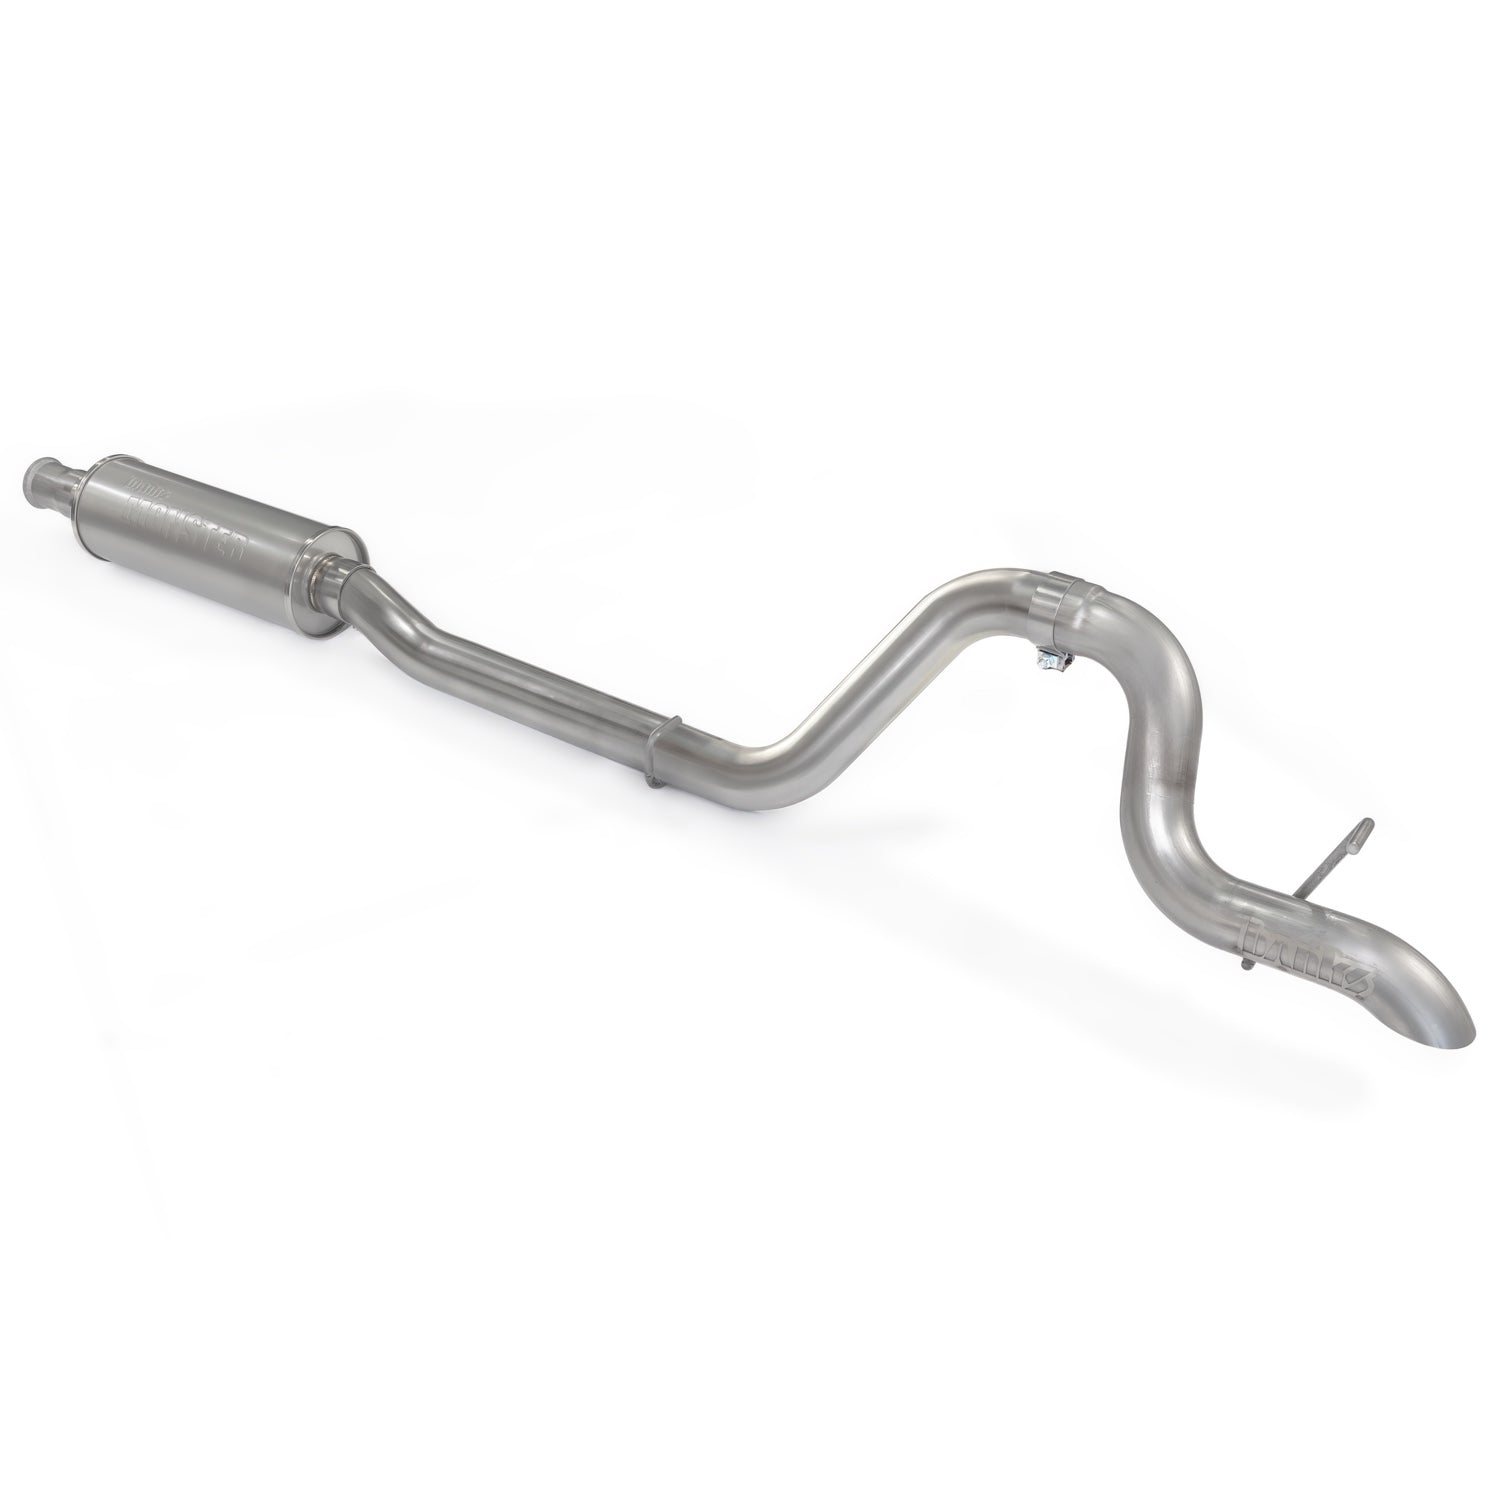 Jeep Performance Exhaust Systems and Upgrade Kits - Banks